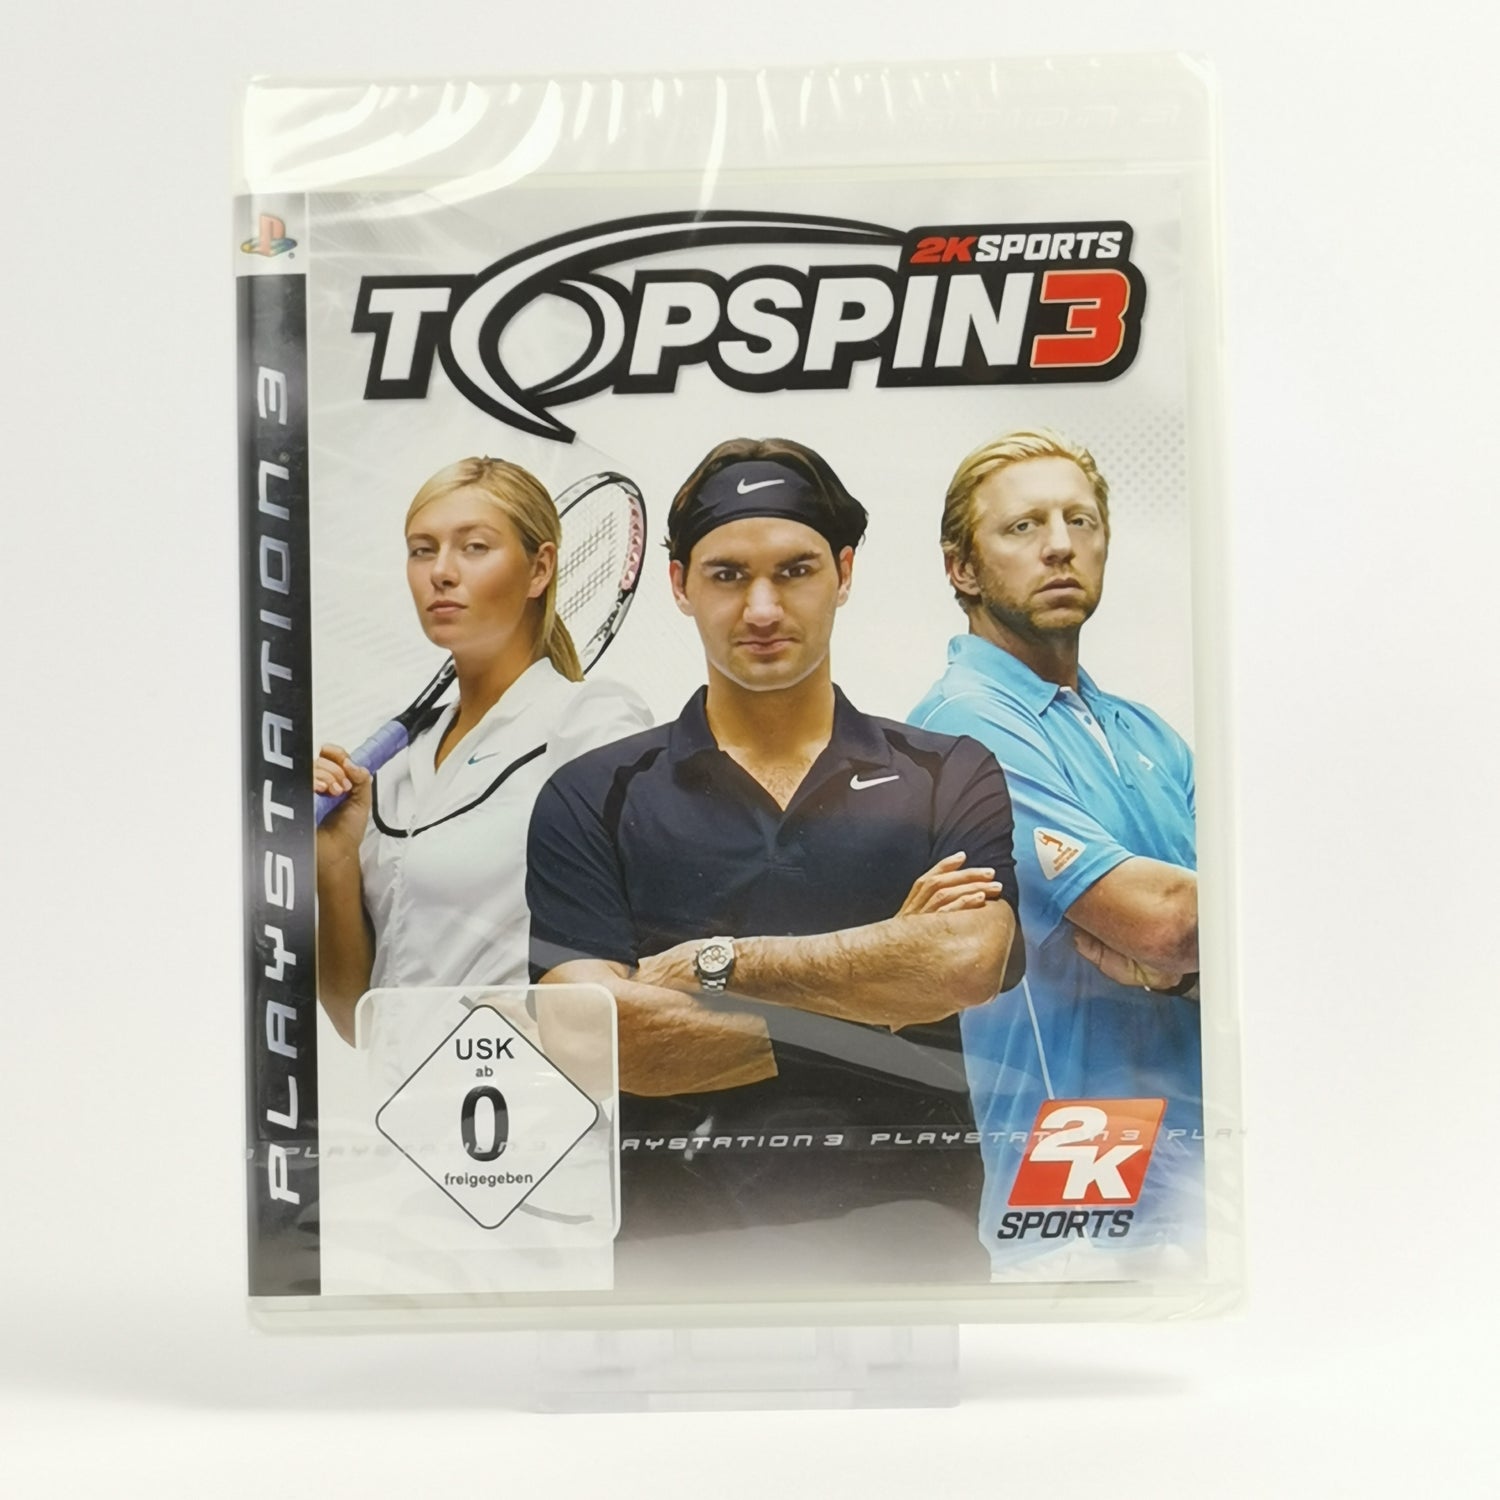 Sony Playstation 3 Spiel : Topspin 3 Tennis | OVP PS3 Game - NEU NEW SEALED